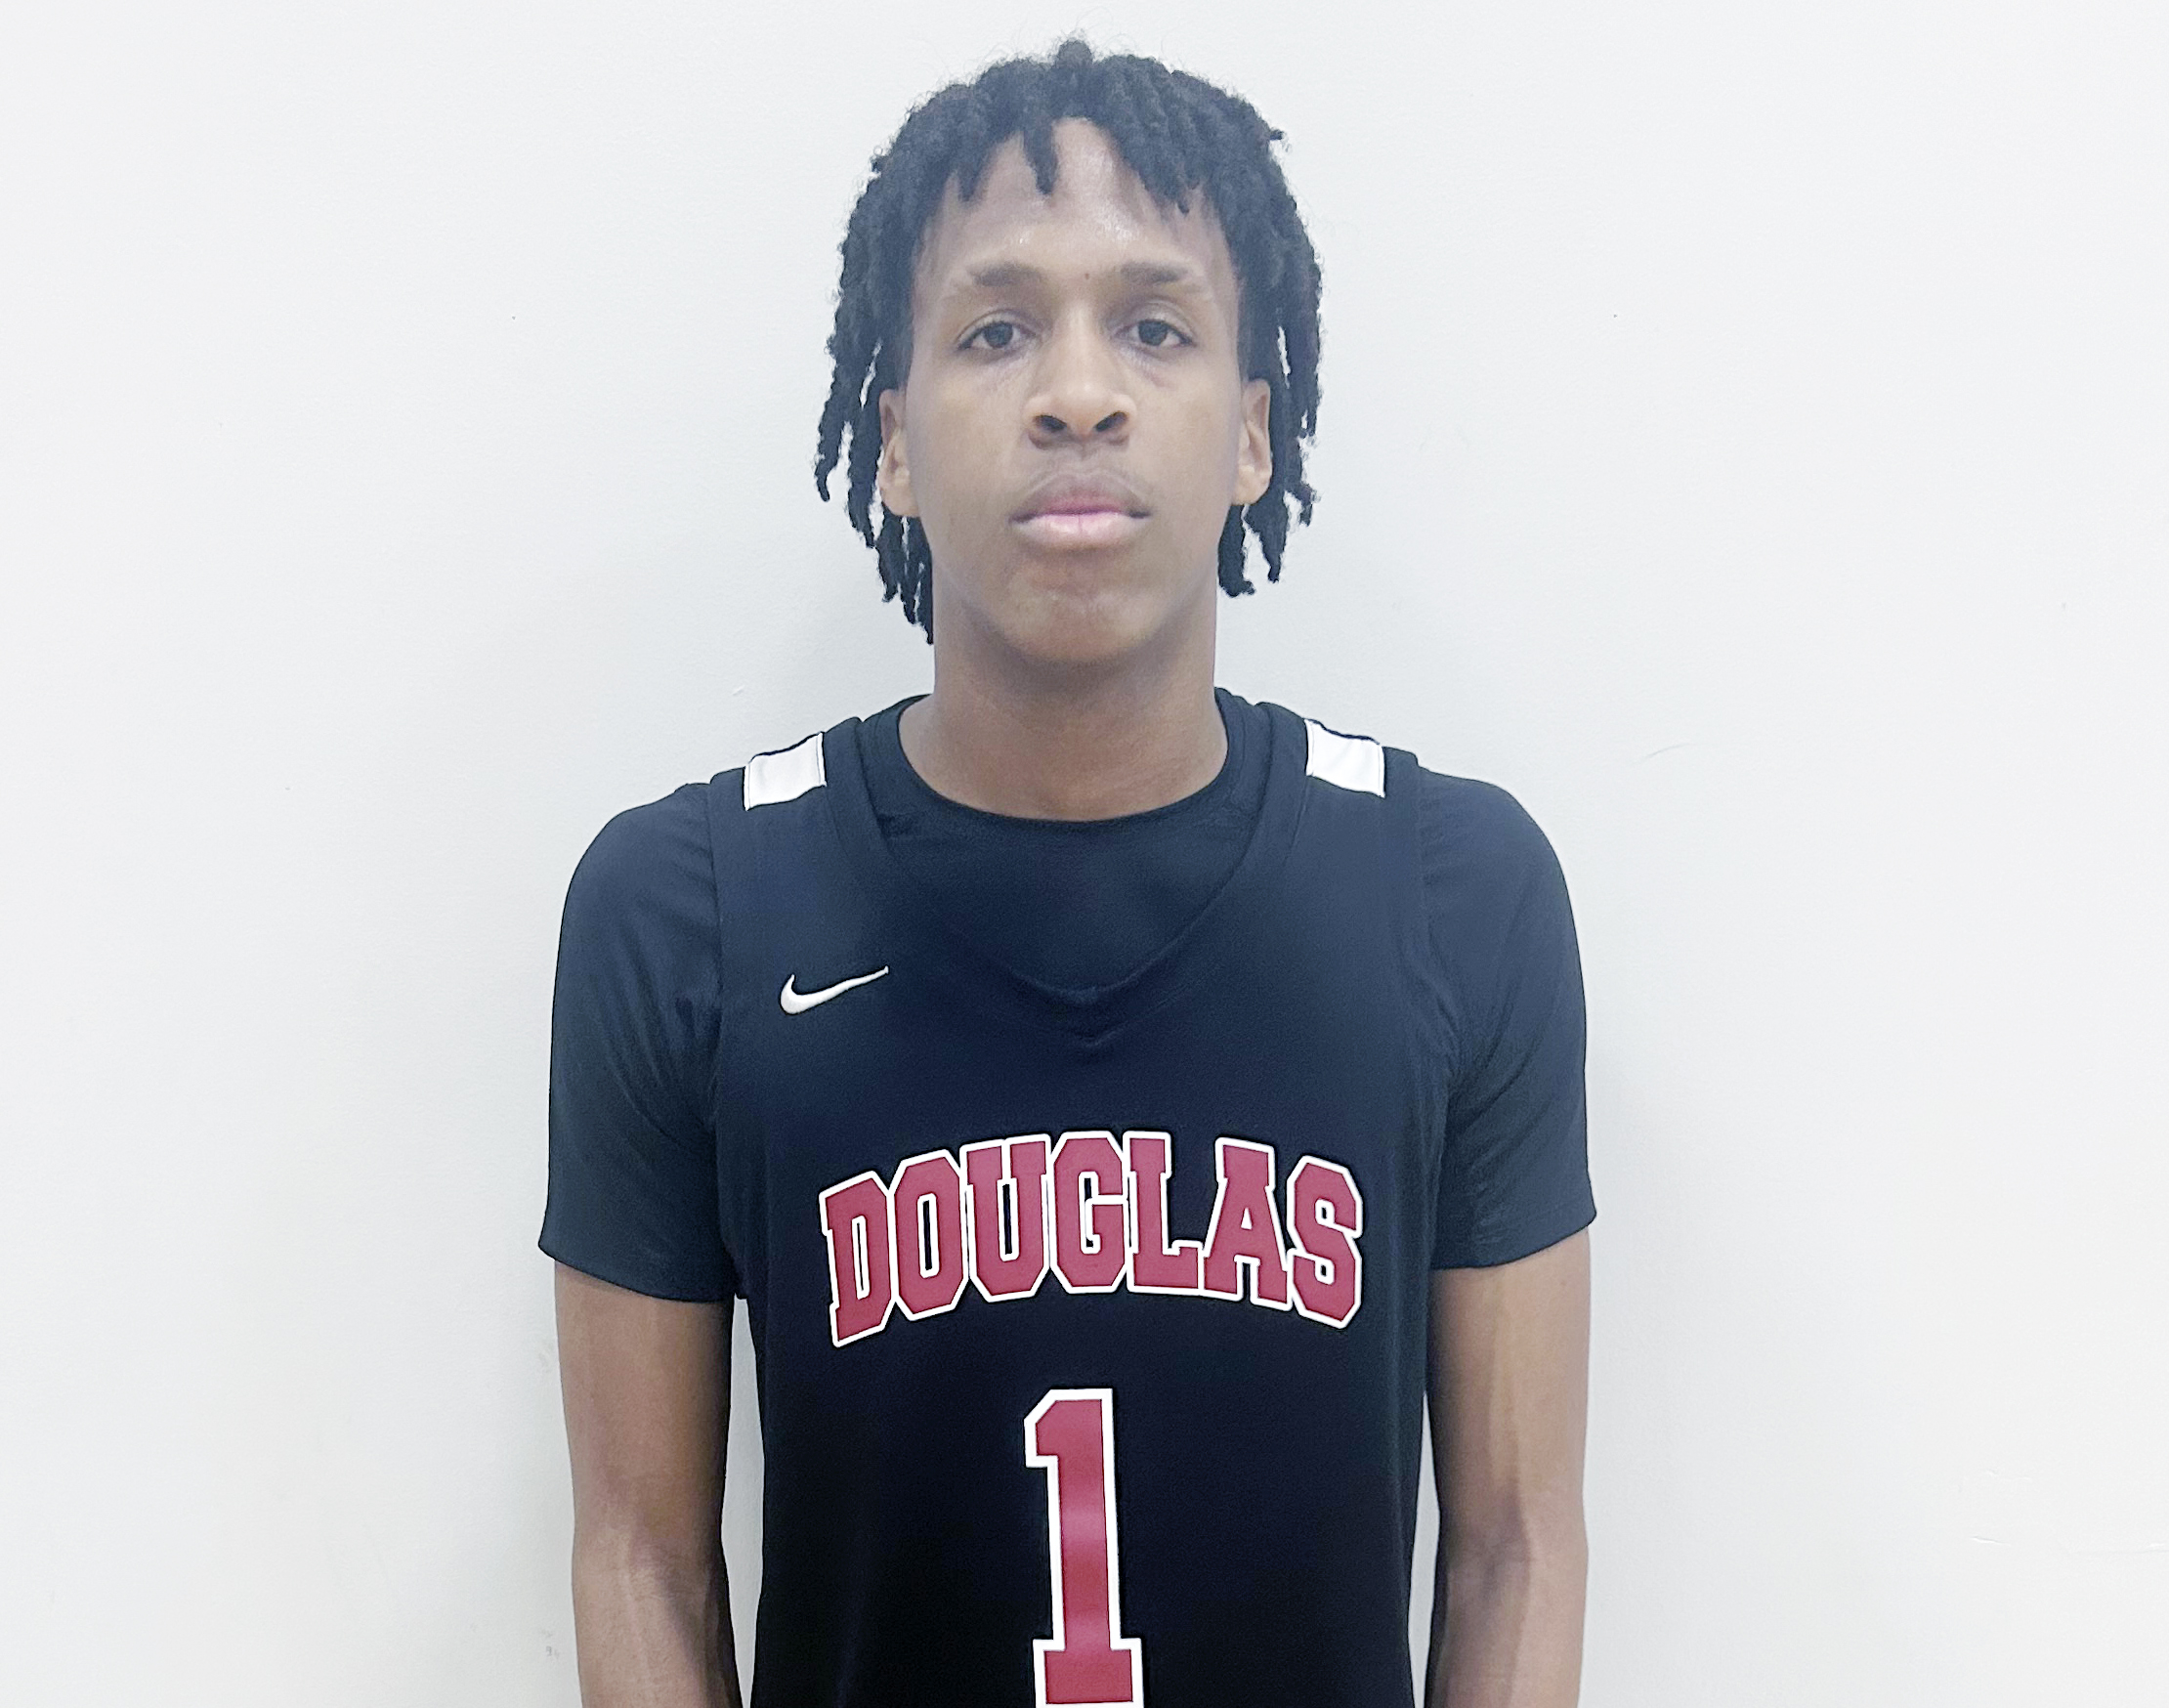 Senior Damerius Summers scored 22 points and added 14 rebounds to lead Majory Stoneman Douglas to 59-50 win over North Broward Prep on Tuesday.